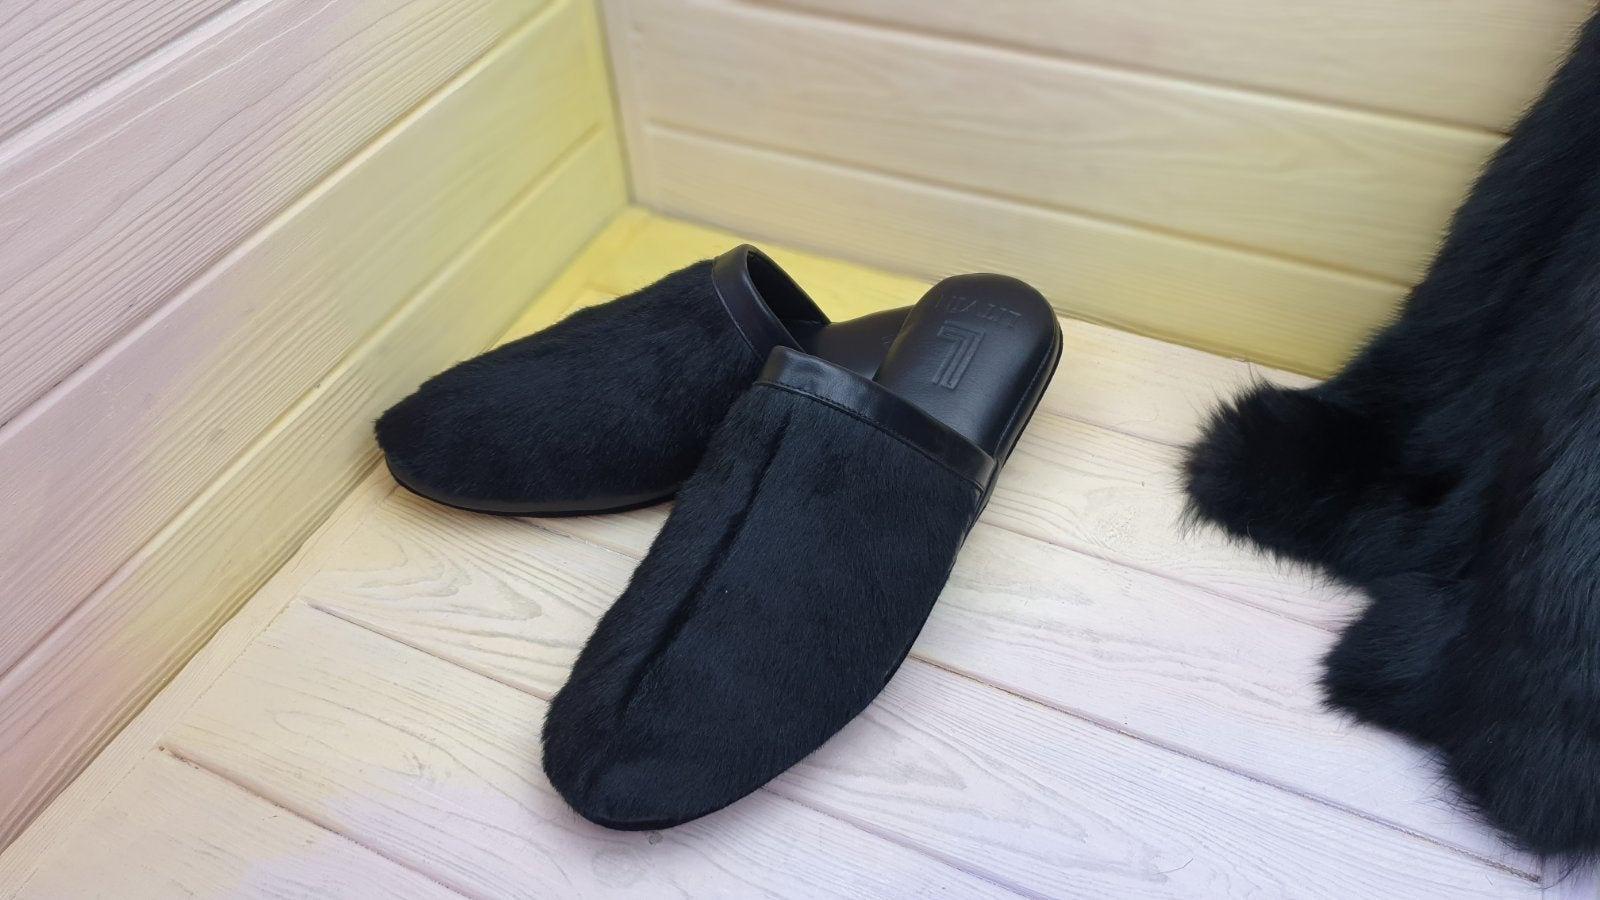 Black slippers men's house shoes leather slippers goat | Etsy